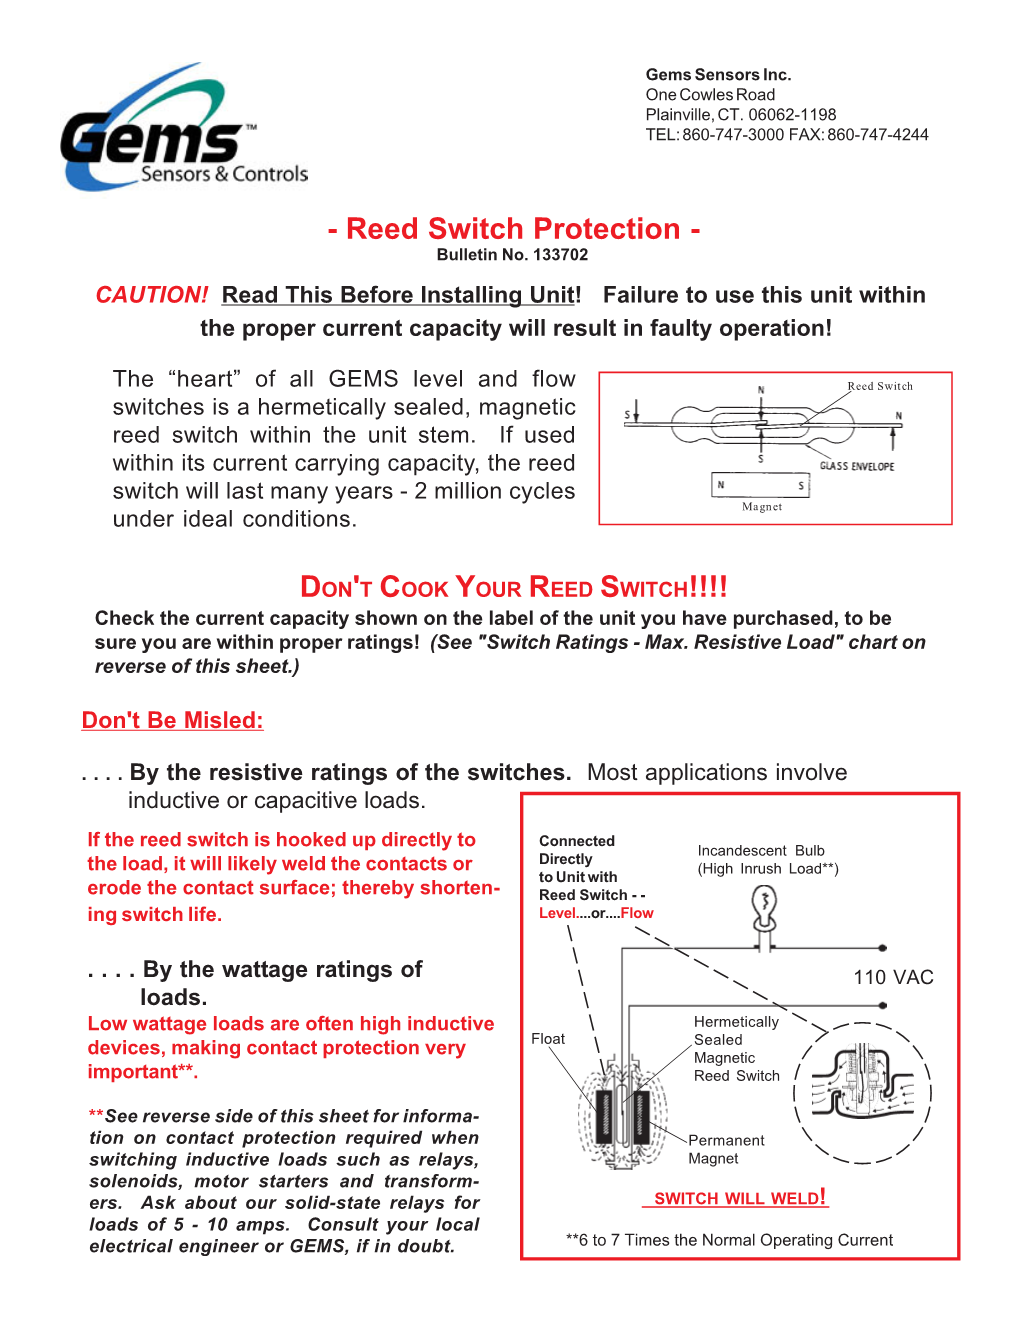 Reed Switch Protection - Bulletin No